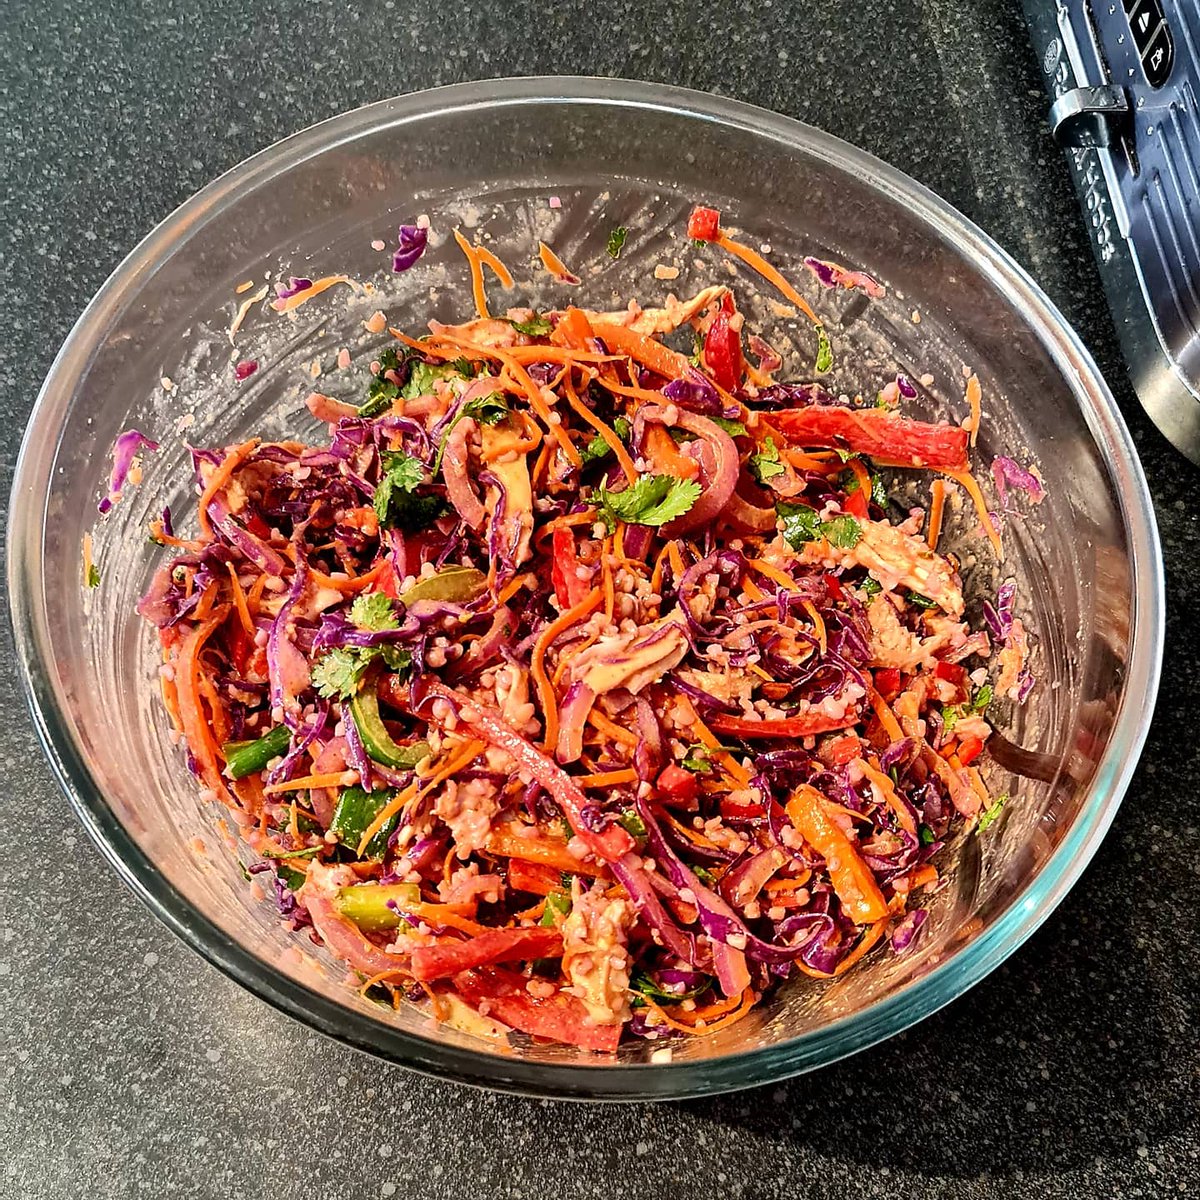 Noodle free red cabbage & chicken pad thai with a homemade almond butter sauce 😋🤤
#homemadefood #foodie #dinner #foodlover #noodlefreepadthai #cleaneating #lowcarb #asianfood #fetchyourbody2021 #healthyeats #healthylifestyle #thaifoodlover #chickenpadthai #healthyrecipes